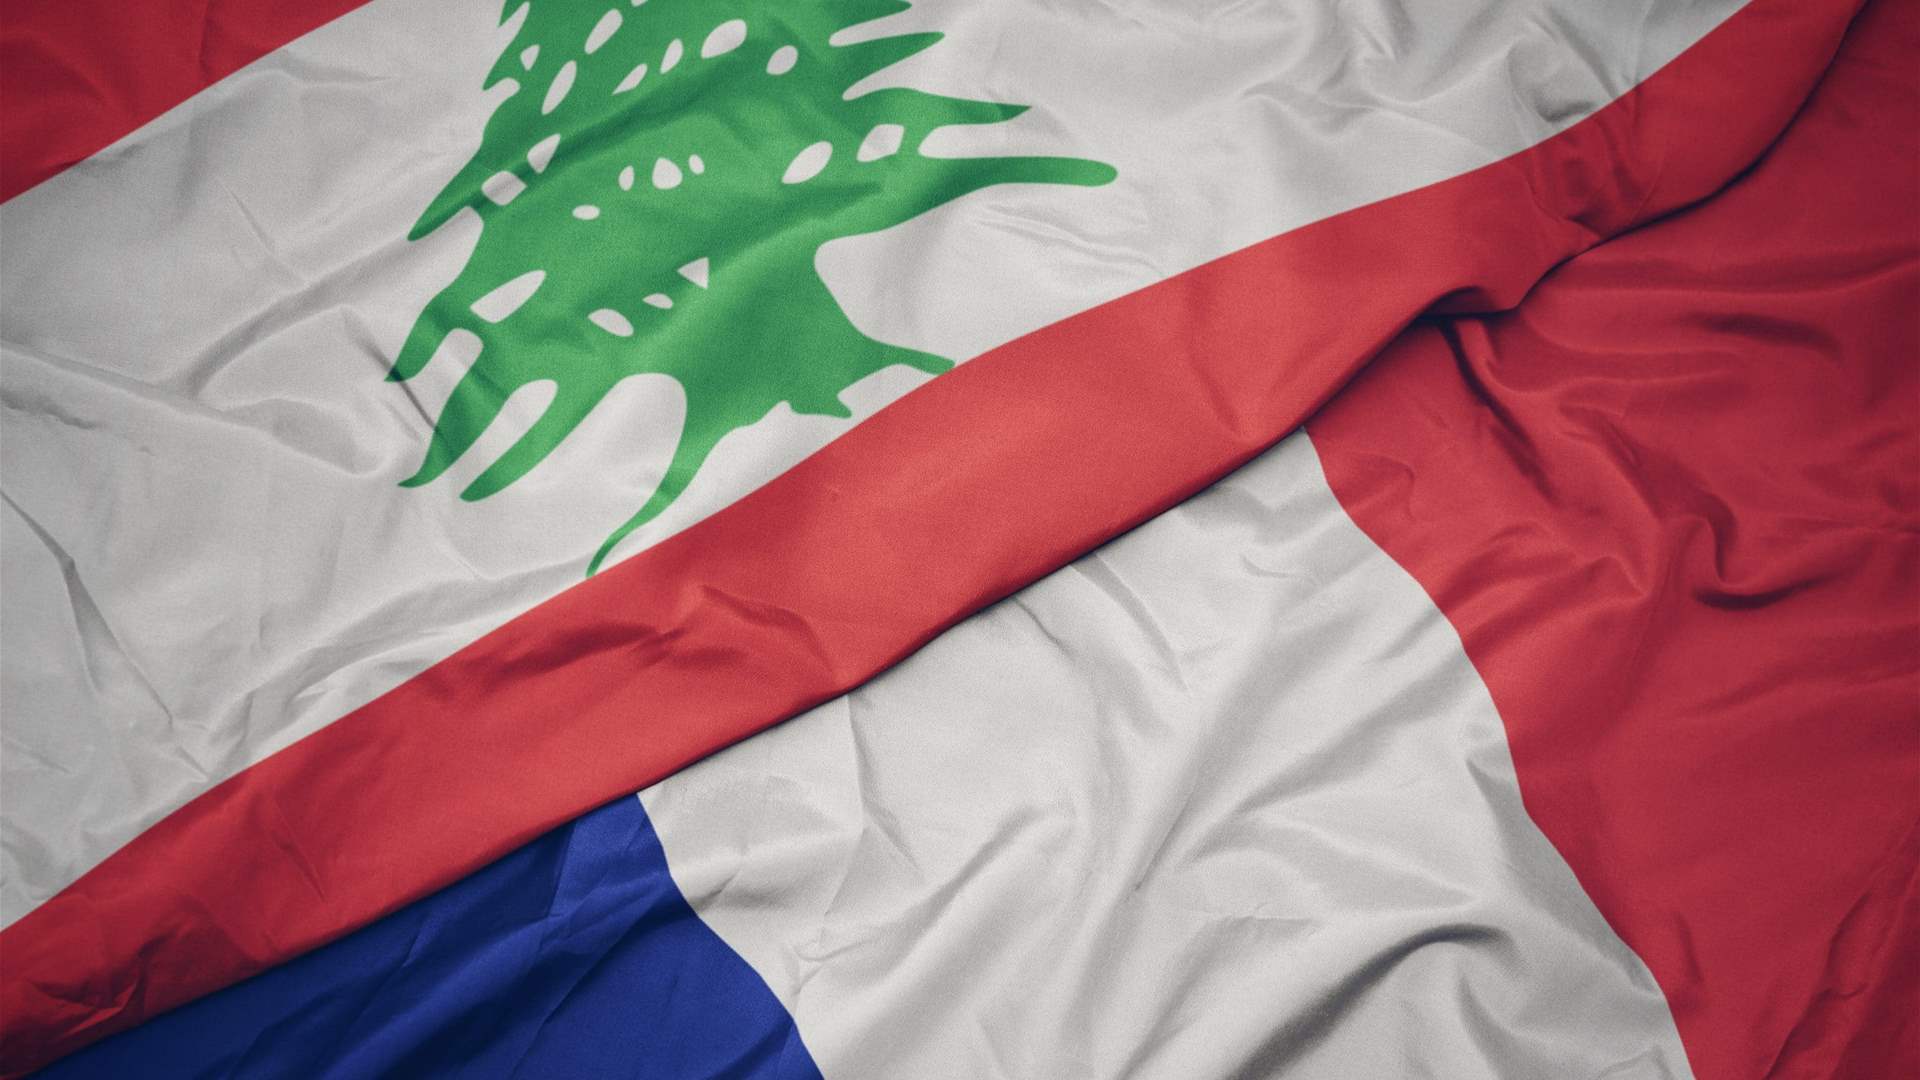 France&#39;s diplomatic precision: Crafting last draft for Lebanon&#39;s International Forces